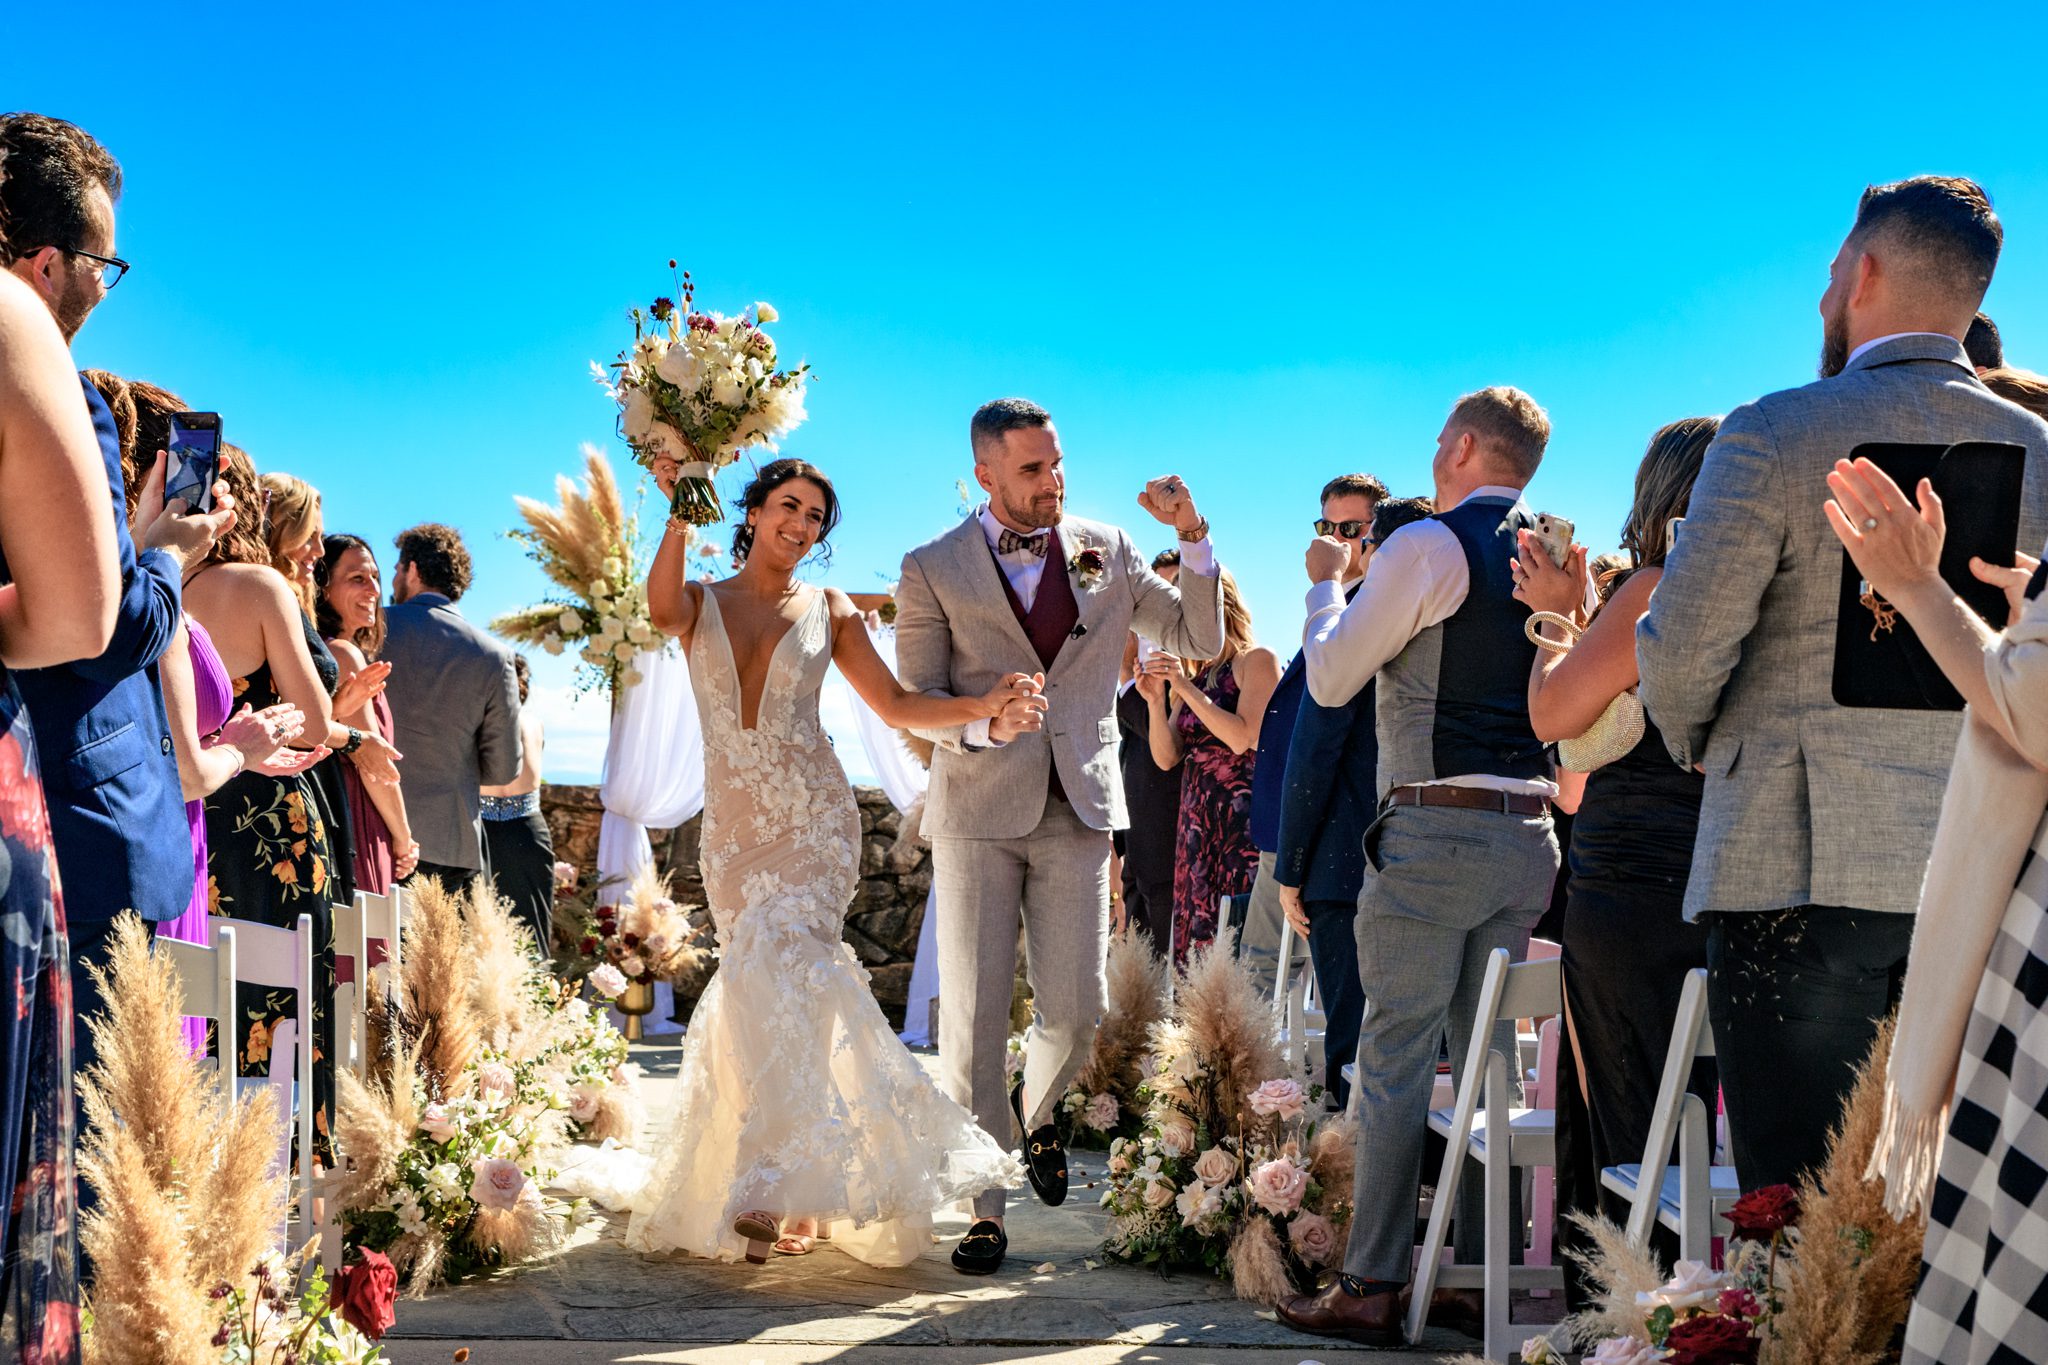 Joyful bride and groom exiting their wedding ceremony on the stunning mountain view terrace at Grove Park Inn, framed by a beautiful floral arch and elegantly decorated aisle